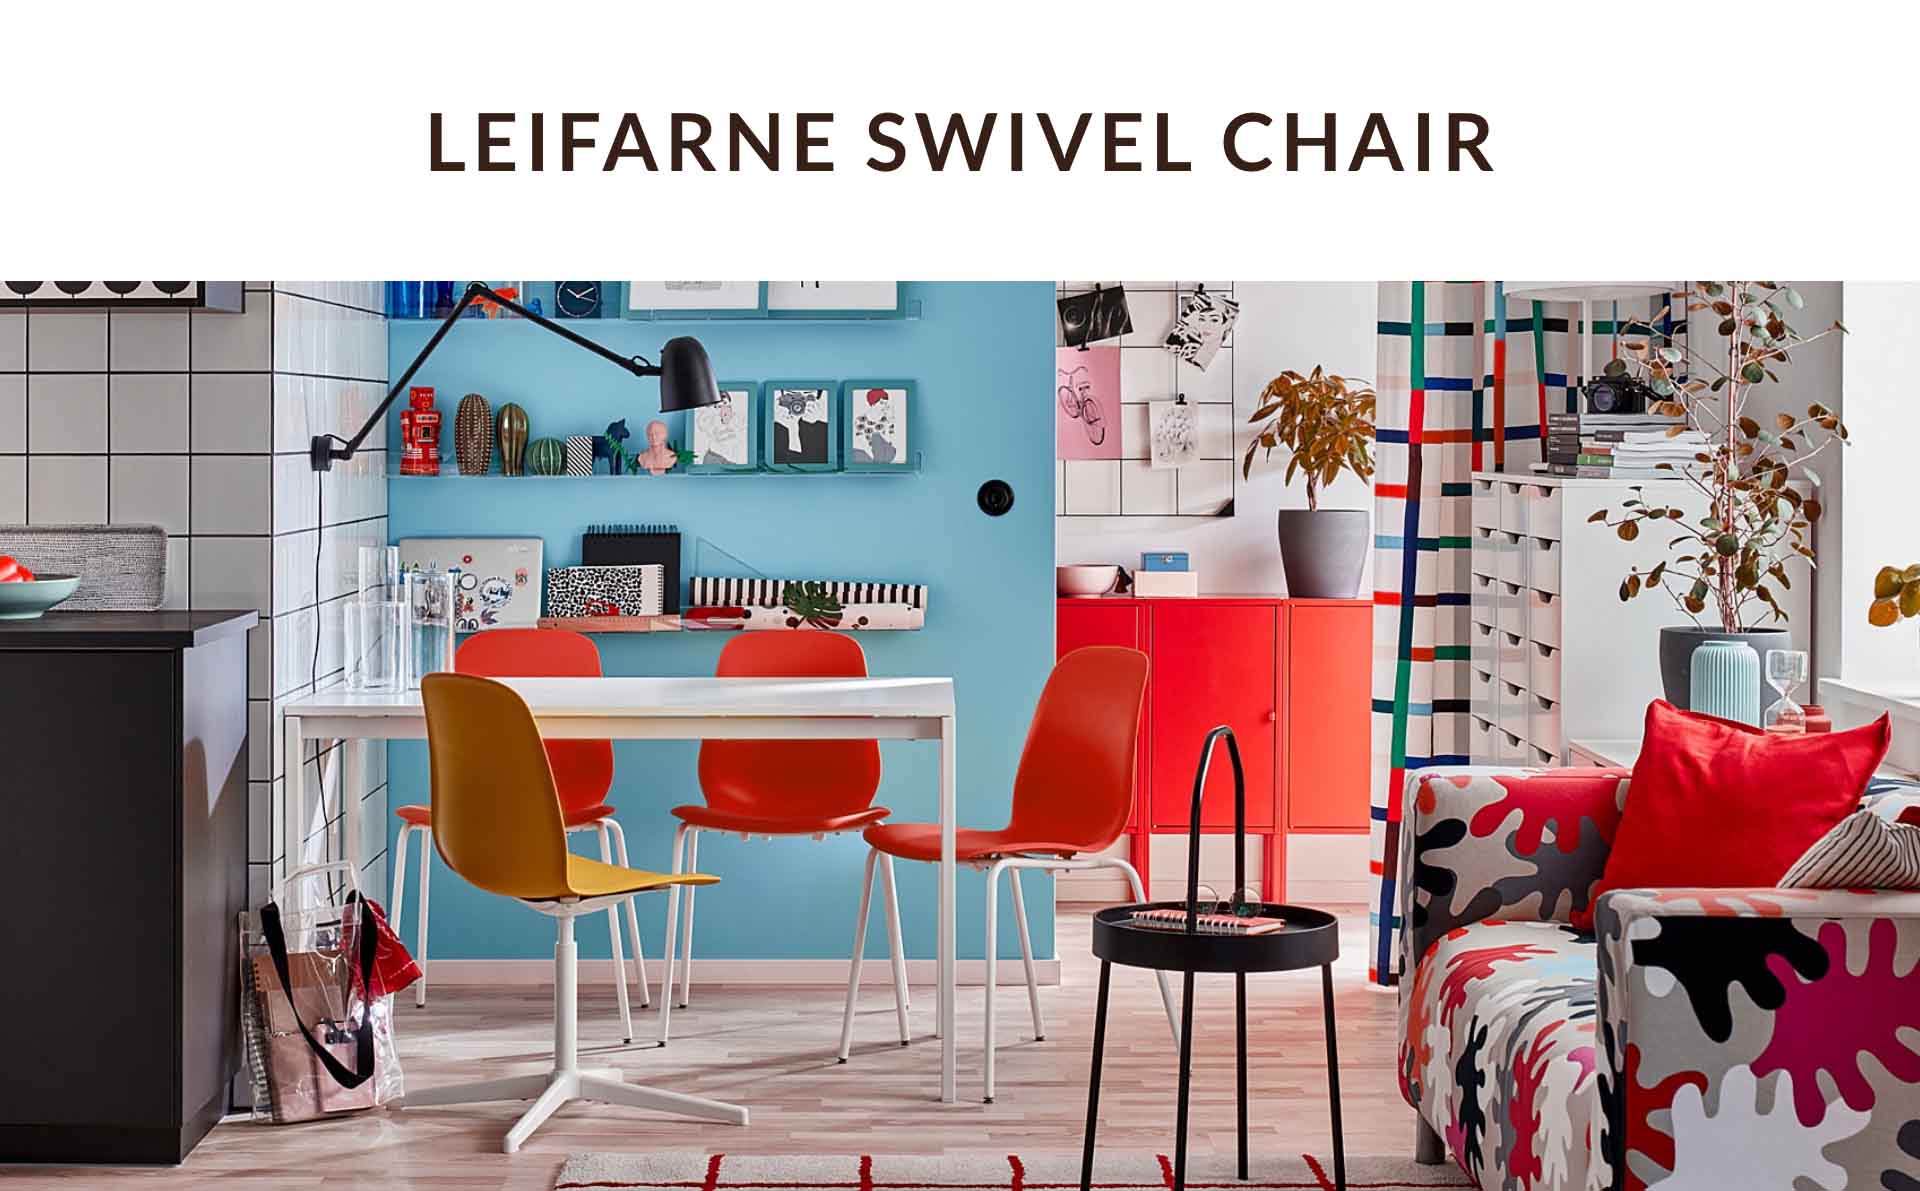 Leifarne Swivel chair | invisiblebed.com